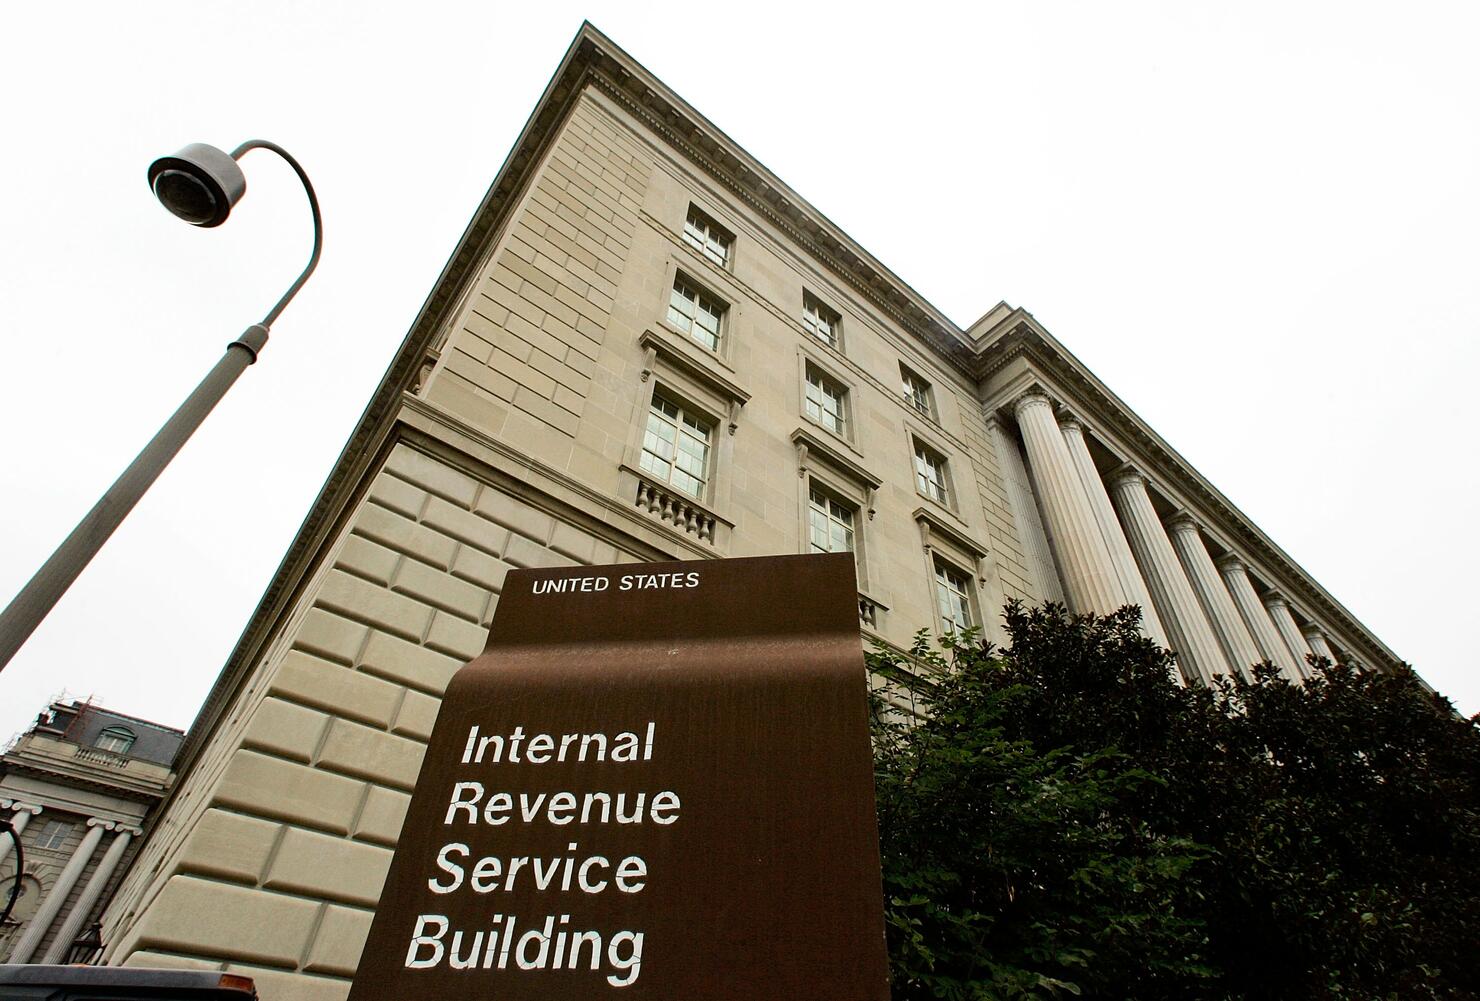 IRS to disburse tax refunds during shutdown if needed